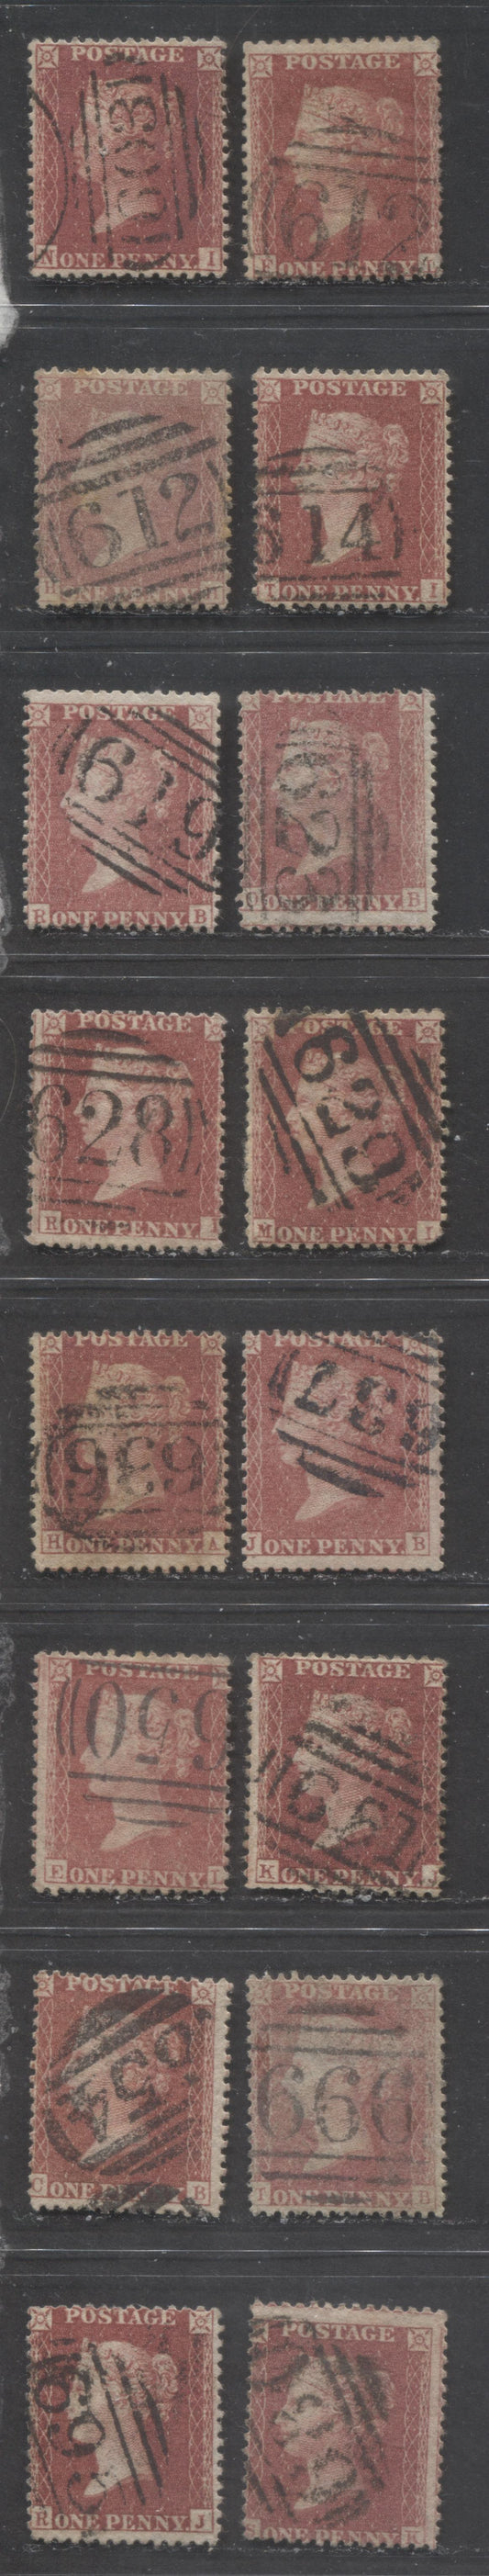 Lot  462 Great Britain - Barred Numeral Cancels For England & Wales: 600-699 SC#20 1d Rose Red, Pale Rose Red & Deep Rose Red 1857-1863 1d Red Stars, Large Crown, White Paper, Perf. 14 Issue, #603/#695, 16 Good & VG Used Singles, Estimated Value $25